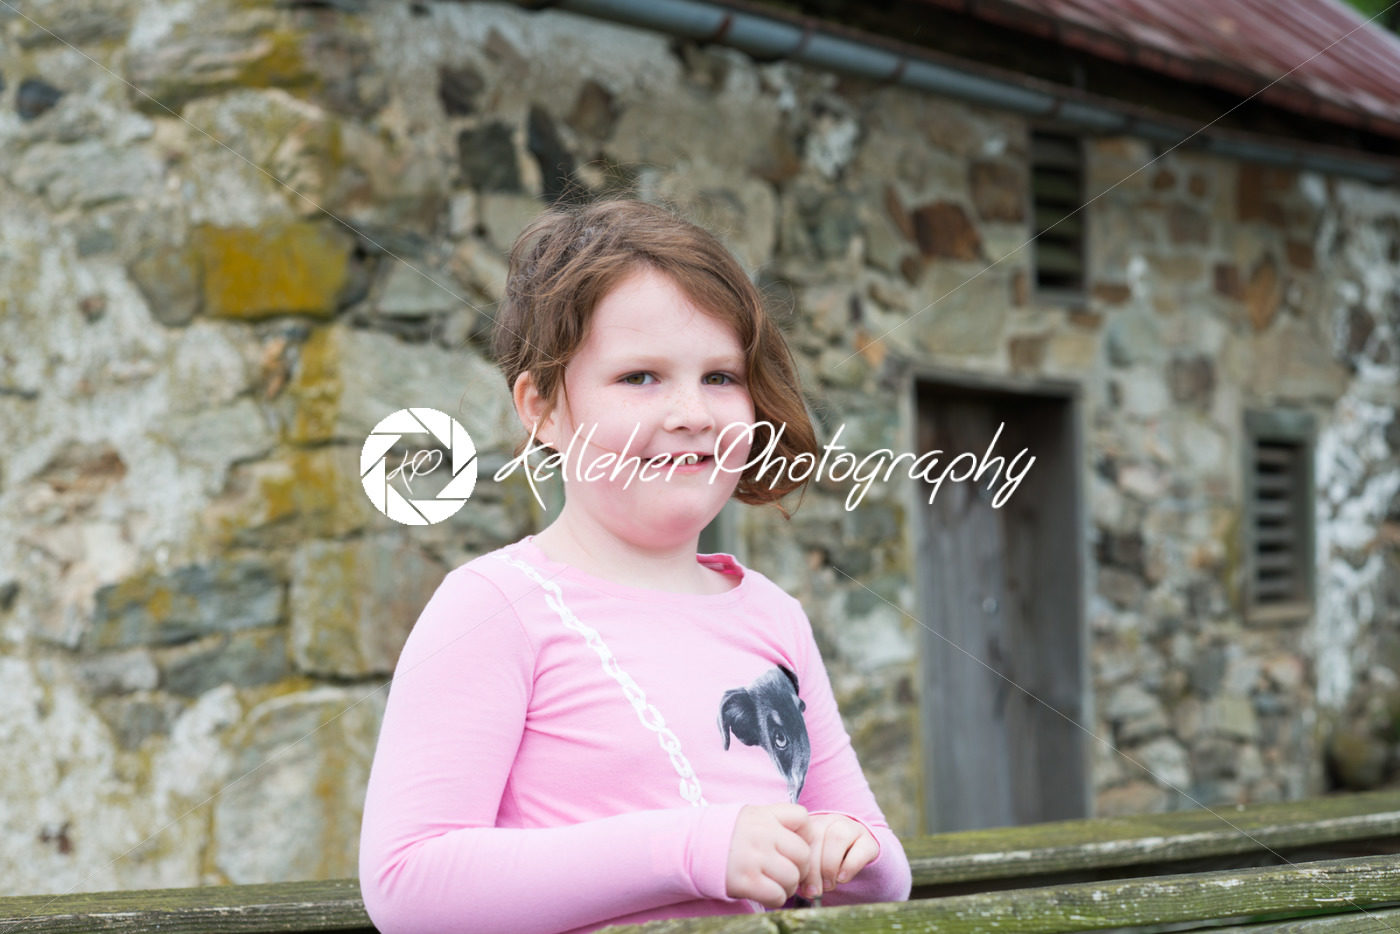 Young girl outside standing in front of an old brick farm house - Kelleher Photography Store